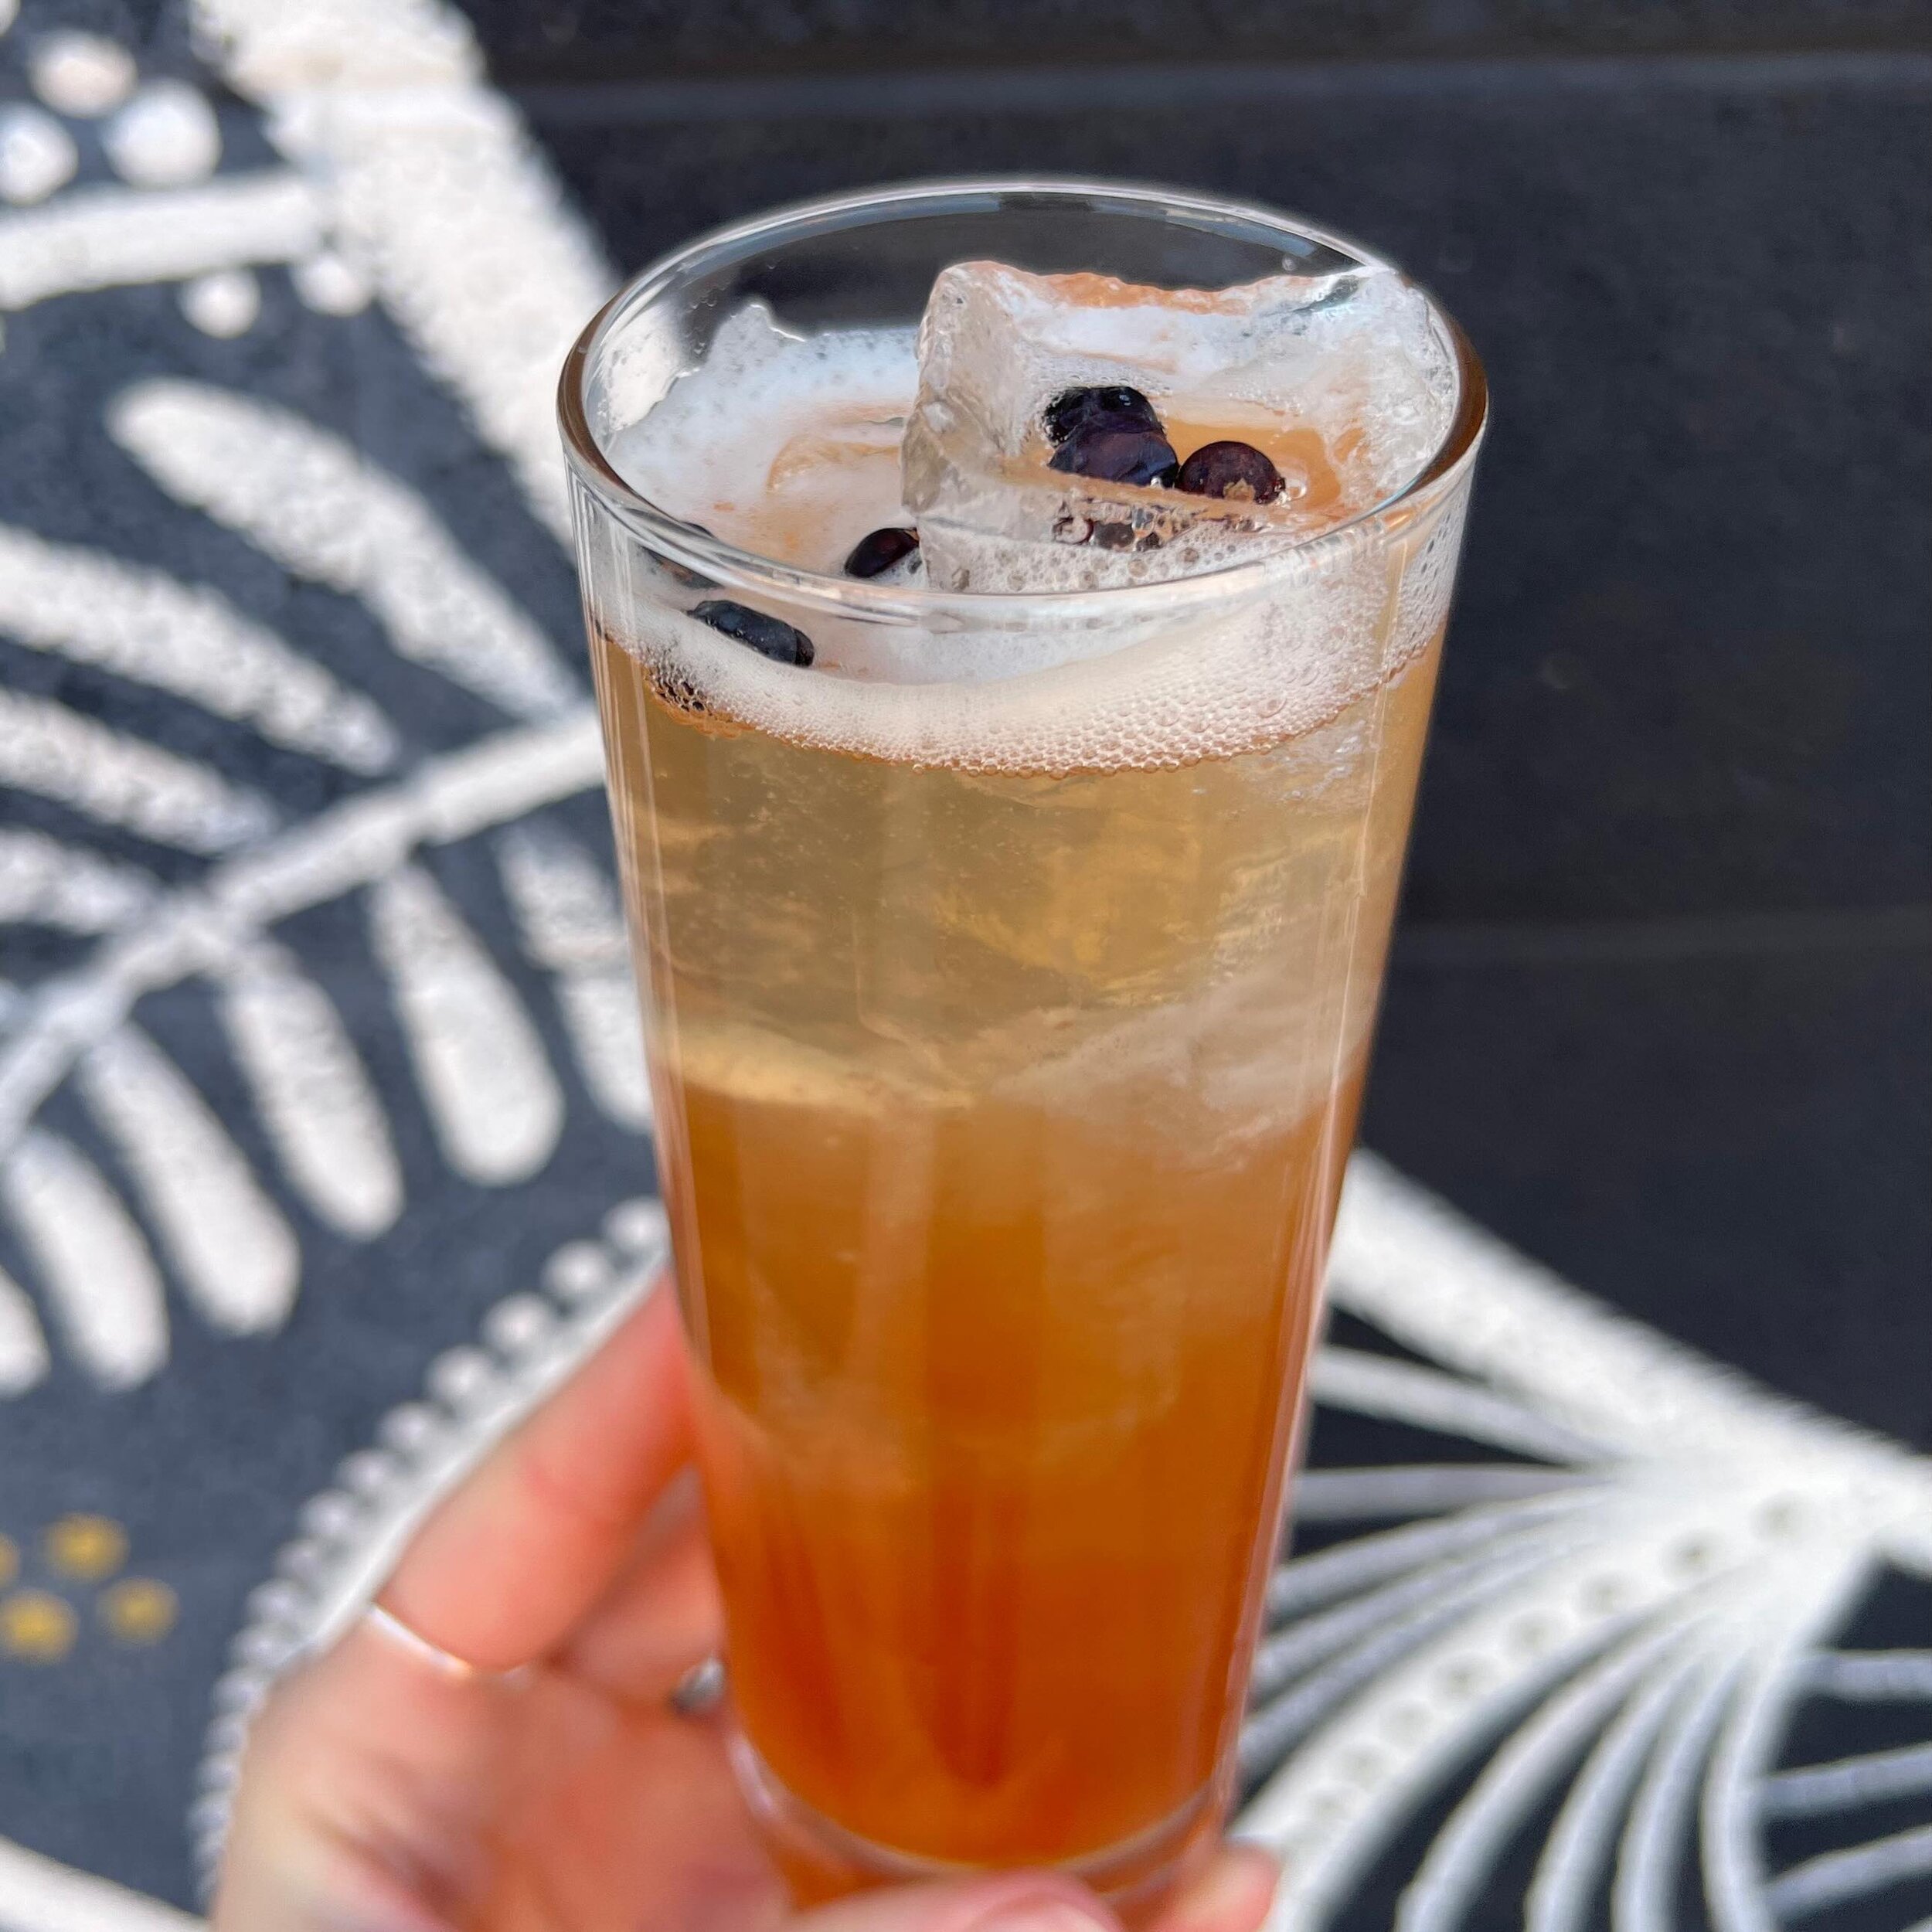 You gotta try our new featured Happy Hour Cocktail! It&rsquo;s custom tailored to get you primed for perfect patio post ups! Heavily floral and oh so delicious it&rsquo;s made with Gin, House-made Lemongrass Rose Tonic, Elderflower, and Soda! Come tr